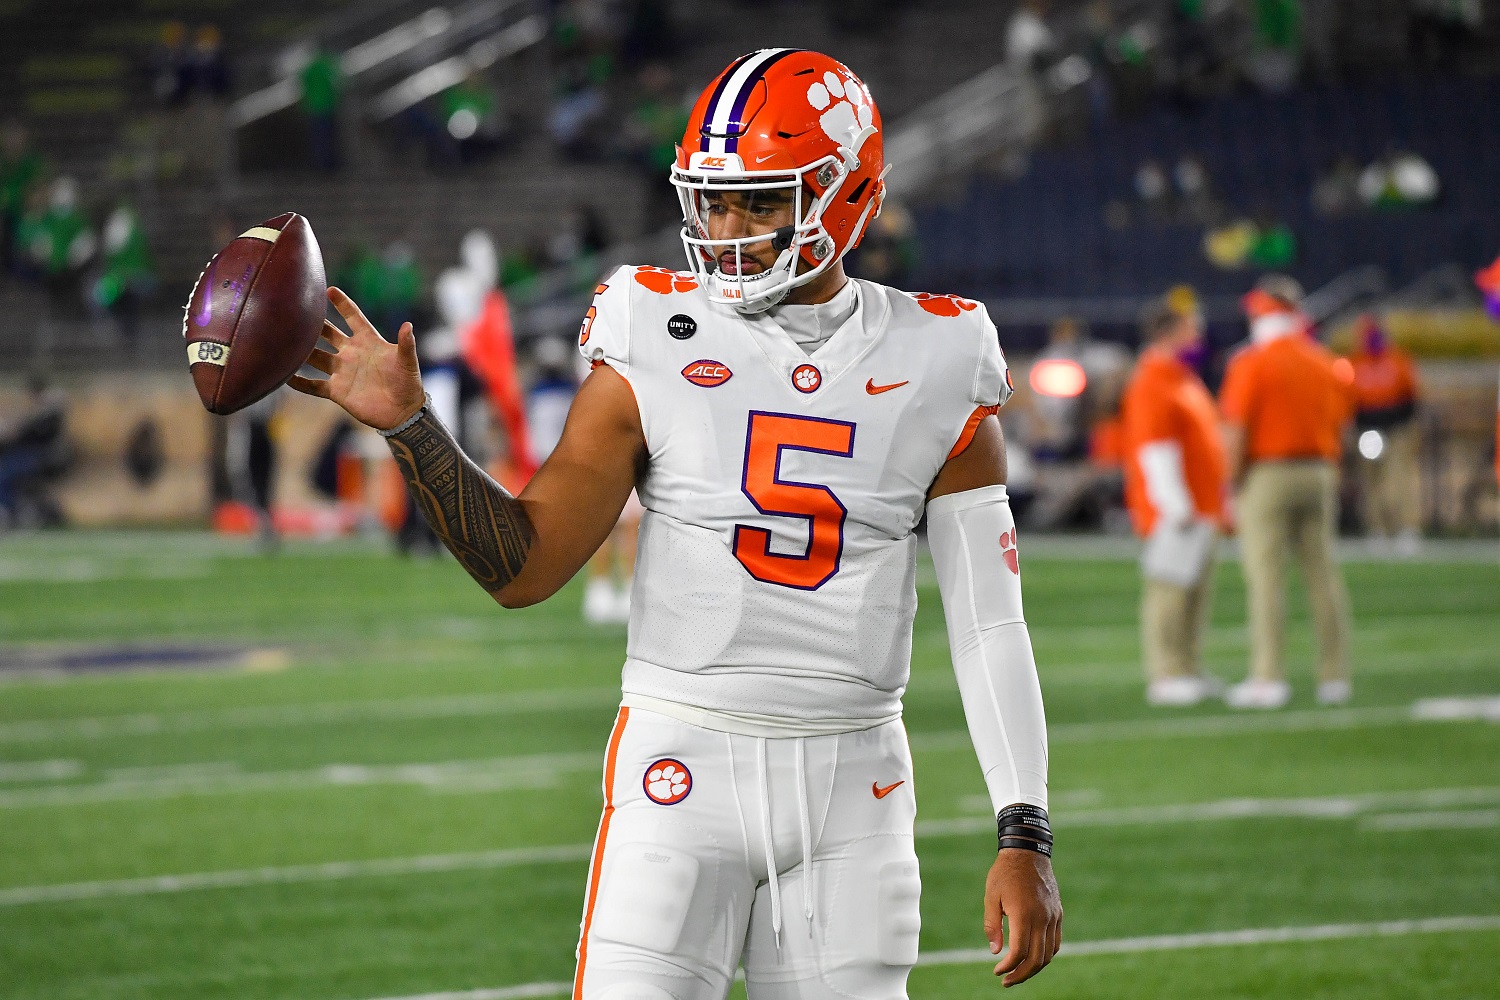 D.J. Uiagalelei of the Clemson Tigers warms up before the game against the Notre Dame Fighting Irish on Nov. 7, 2020, in South Bend, Indiana. | Matt Cashore-Pool/Getty Images